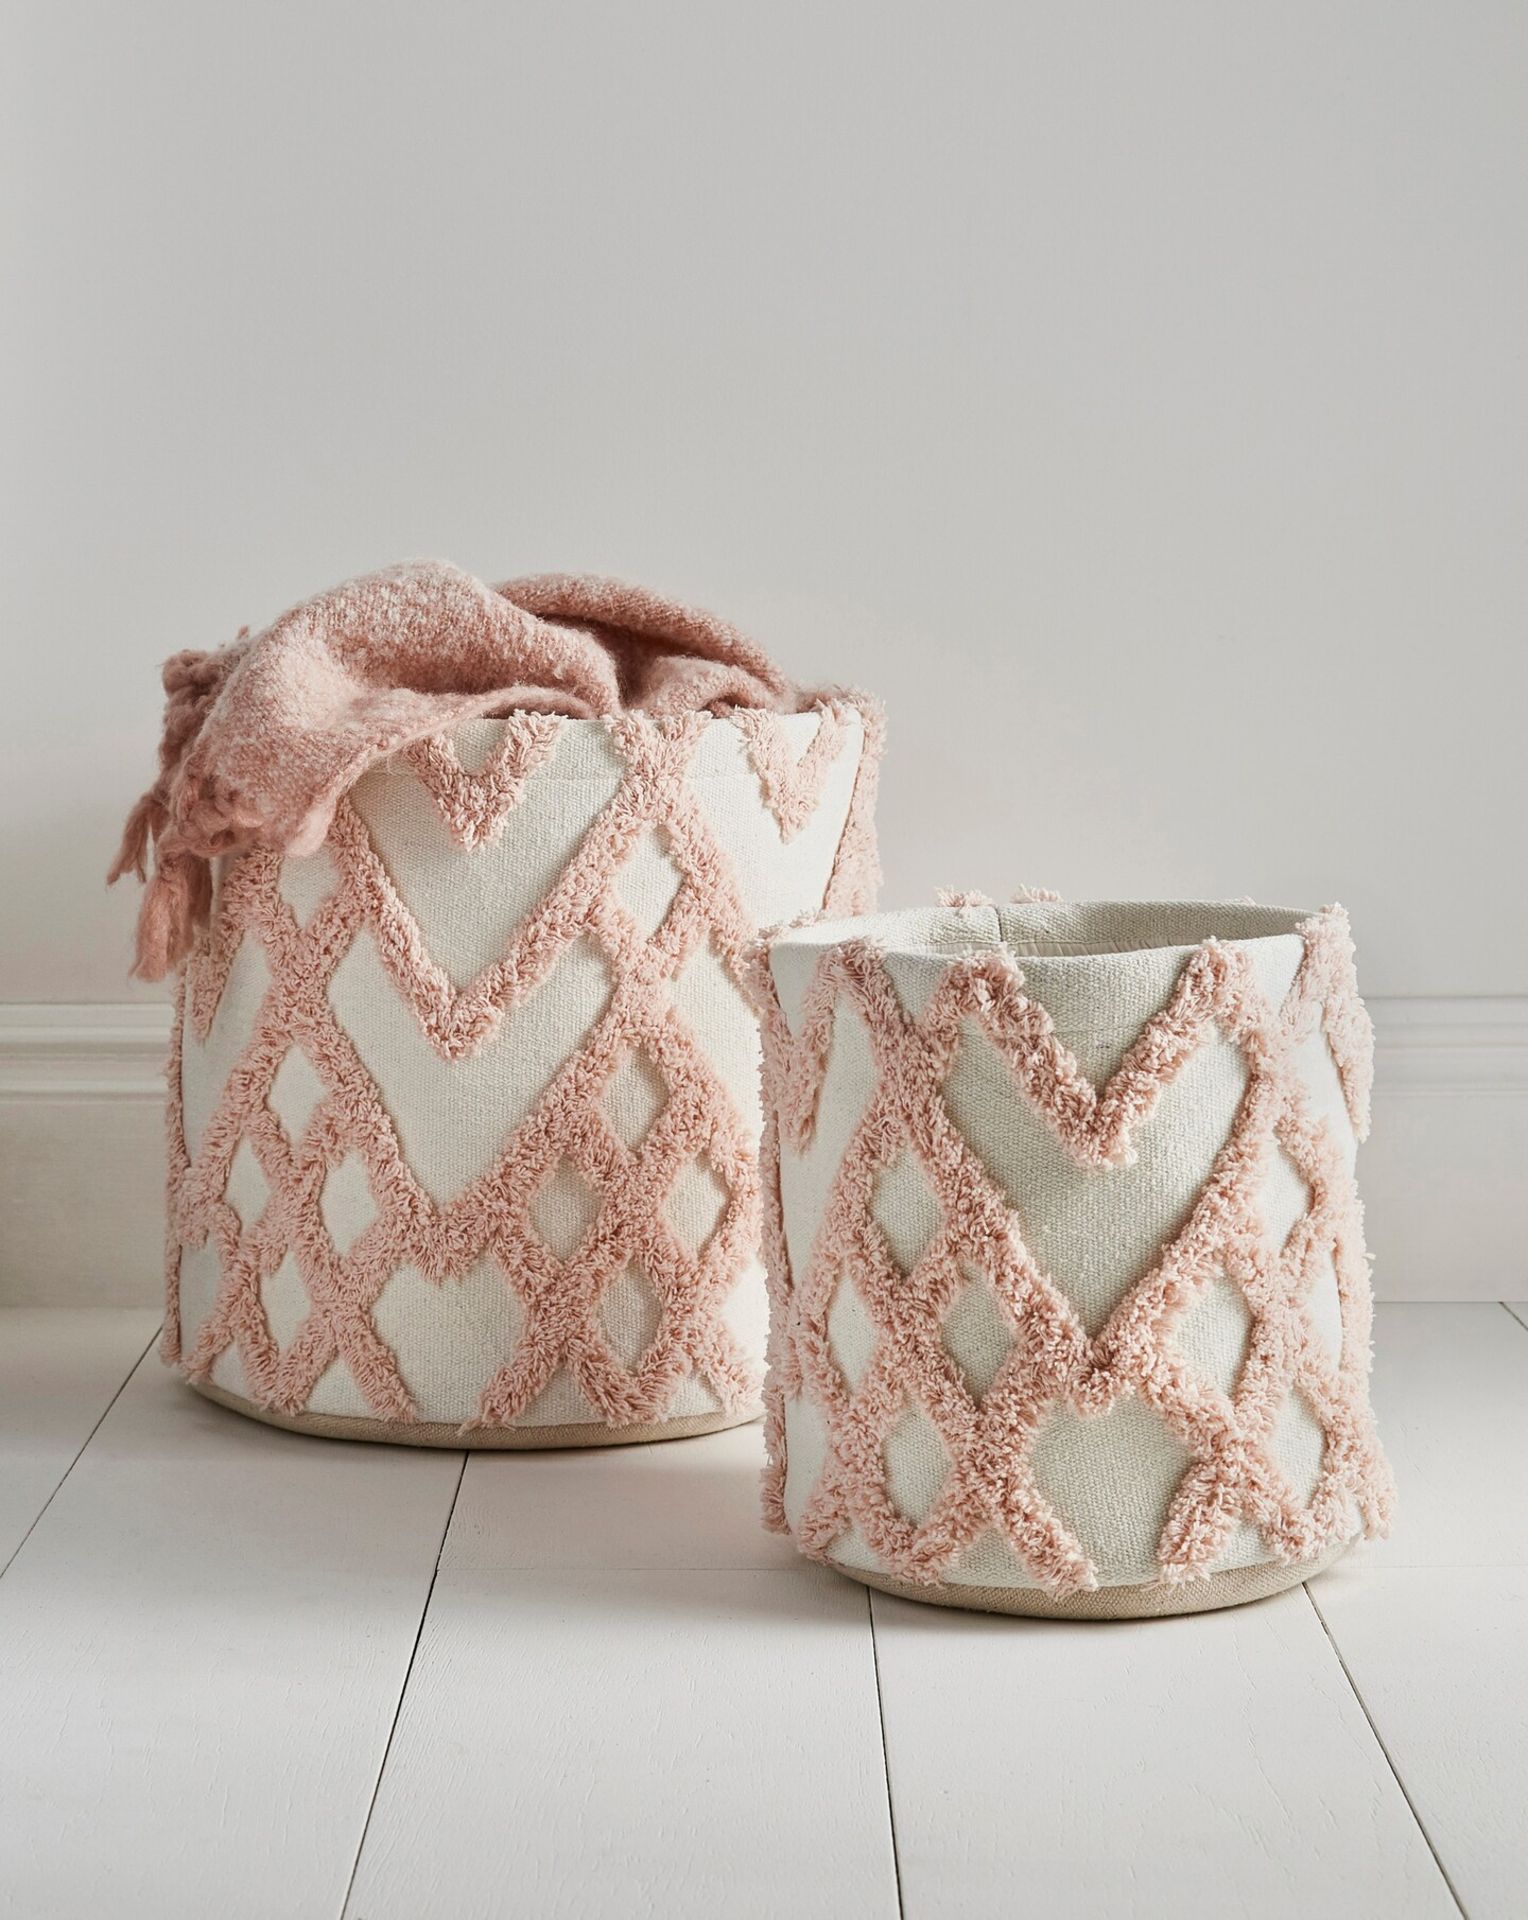 TRADE PALLET TO CONTAIN 20x BRAND NEW Set of 2 Pink Ruffled Woven Baskets. RRP £39 EACH. These